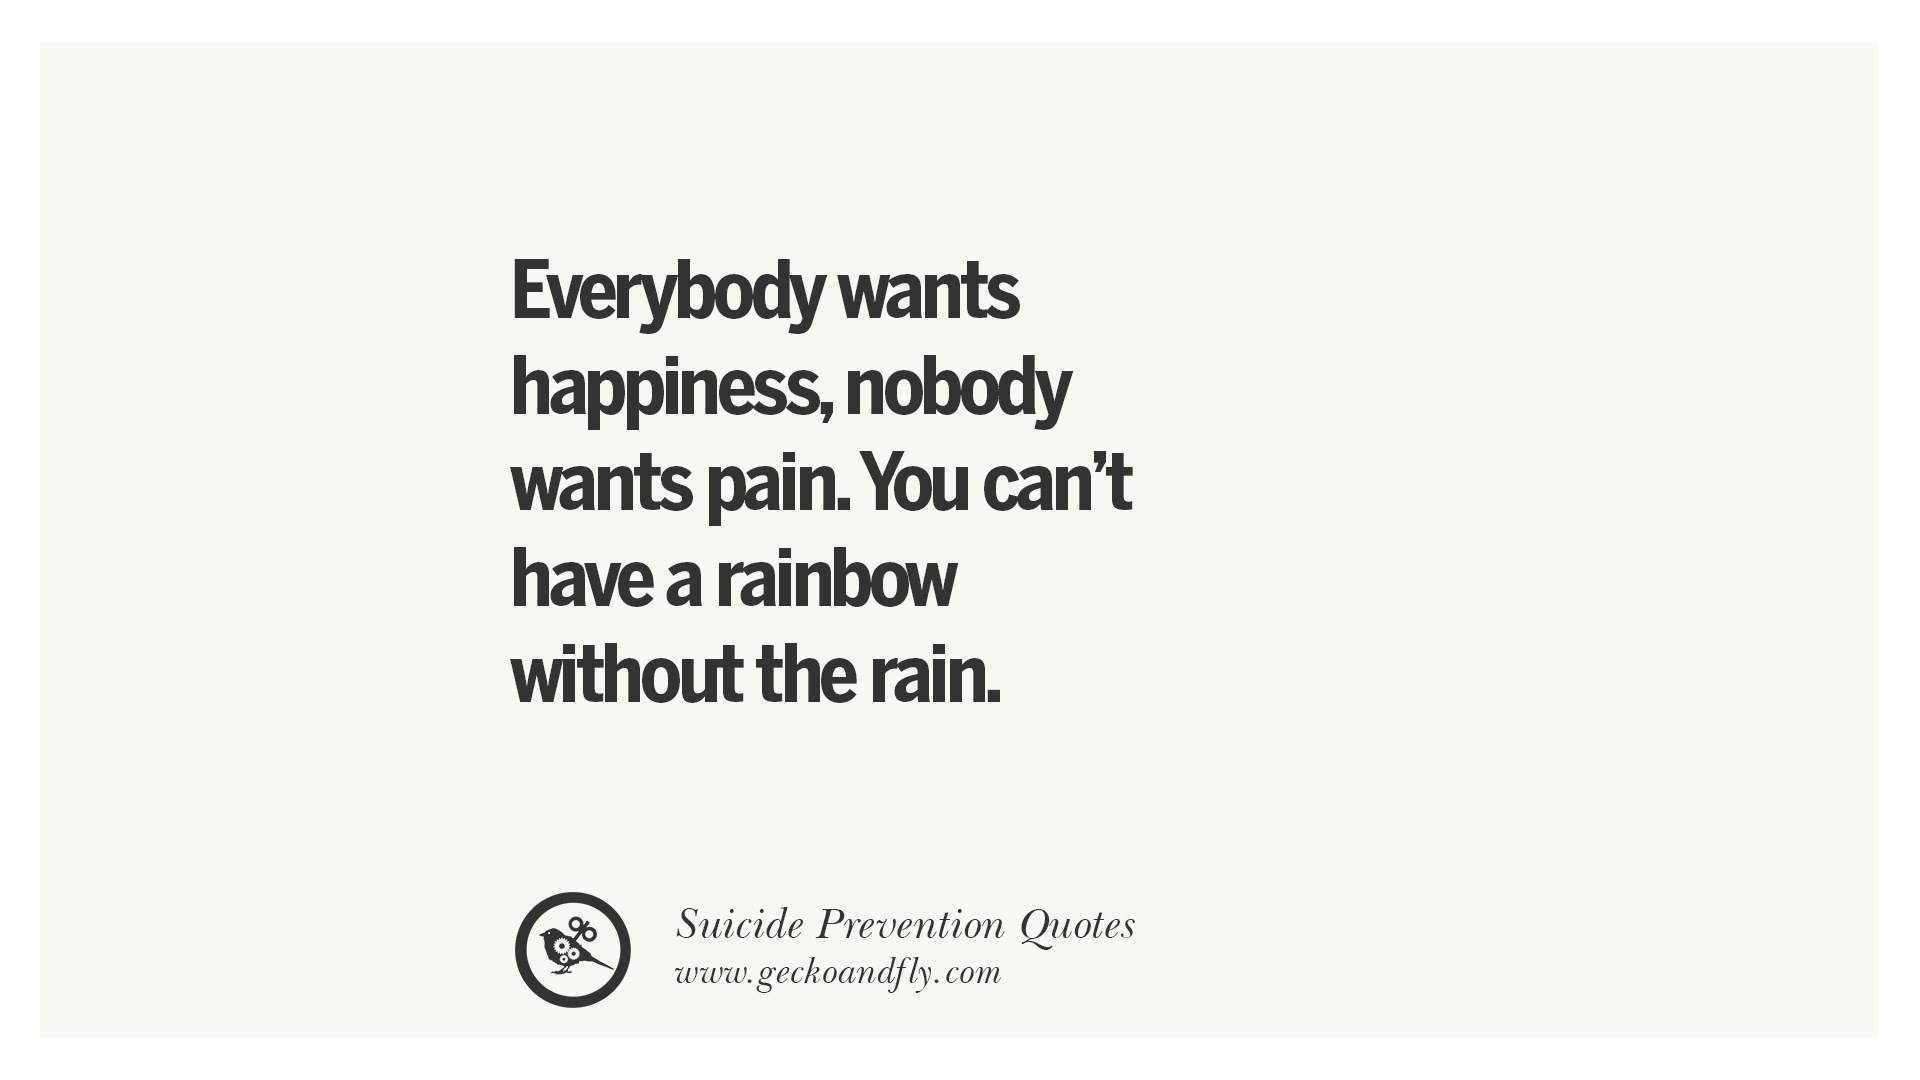 Everybody be happy. "Everybody wants Happiness, Nobody wants Pain, but you can't have a Rainbow, without a little Rain". Everyone is Fine Nobody is Happy.